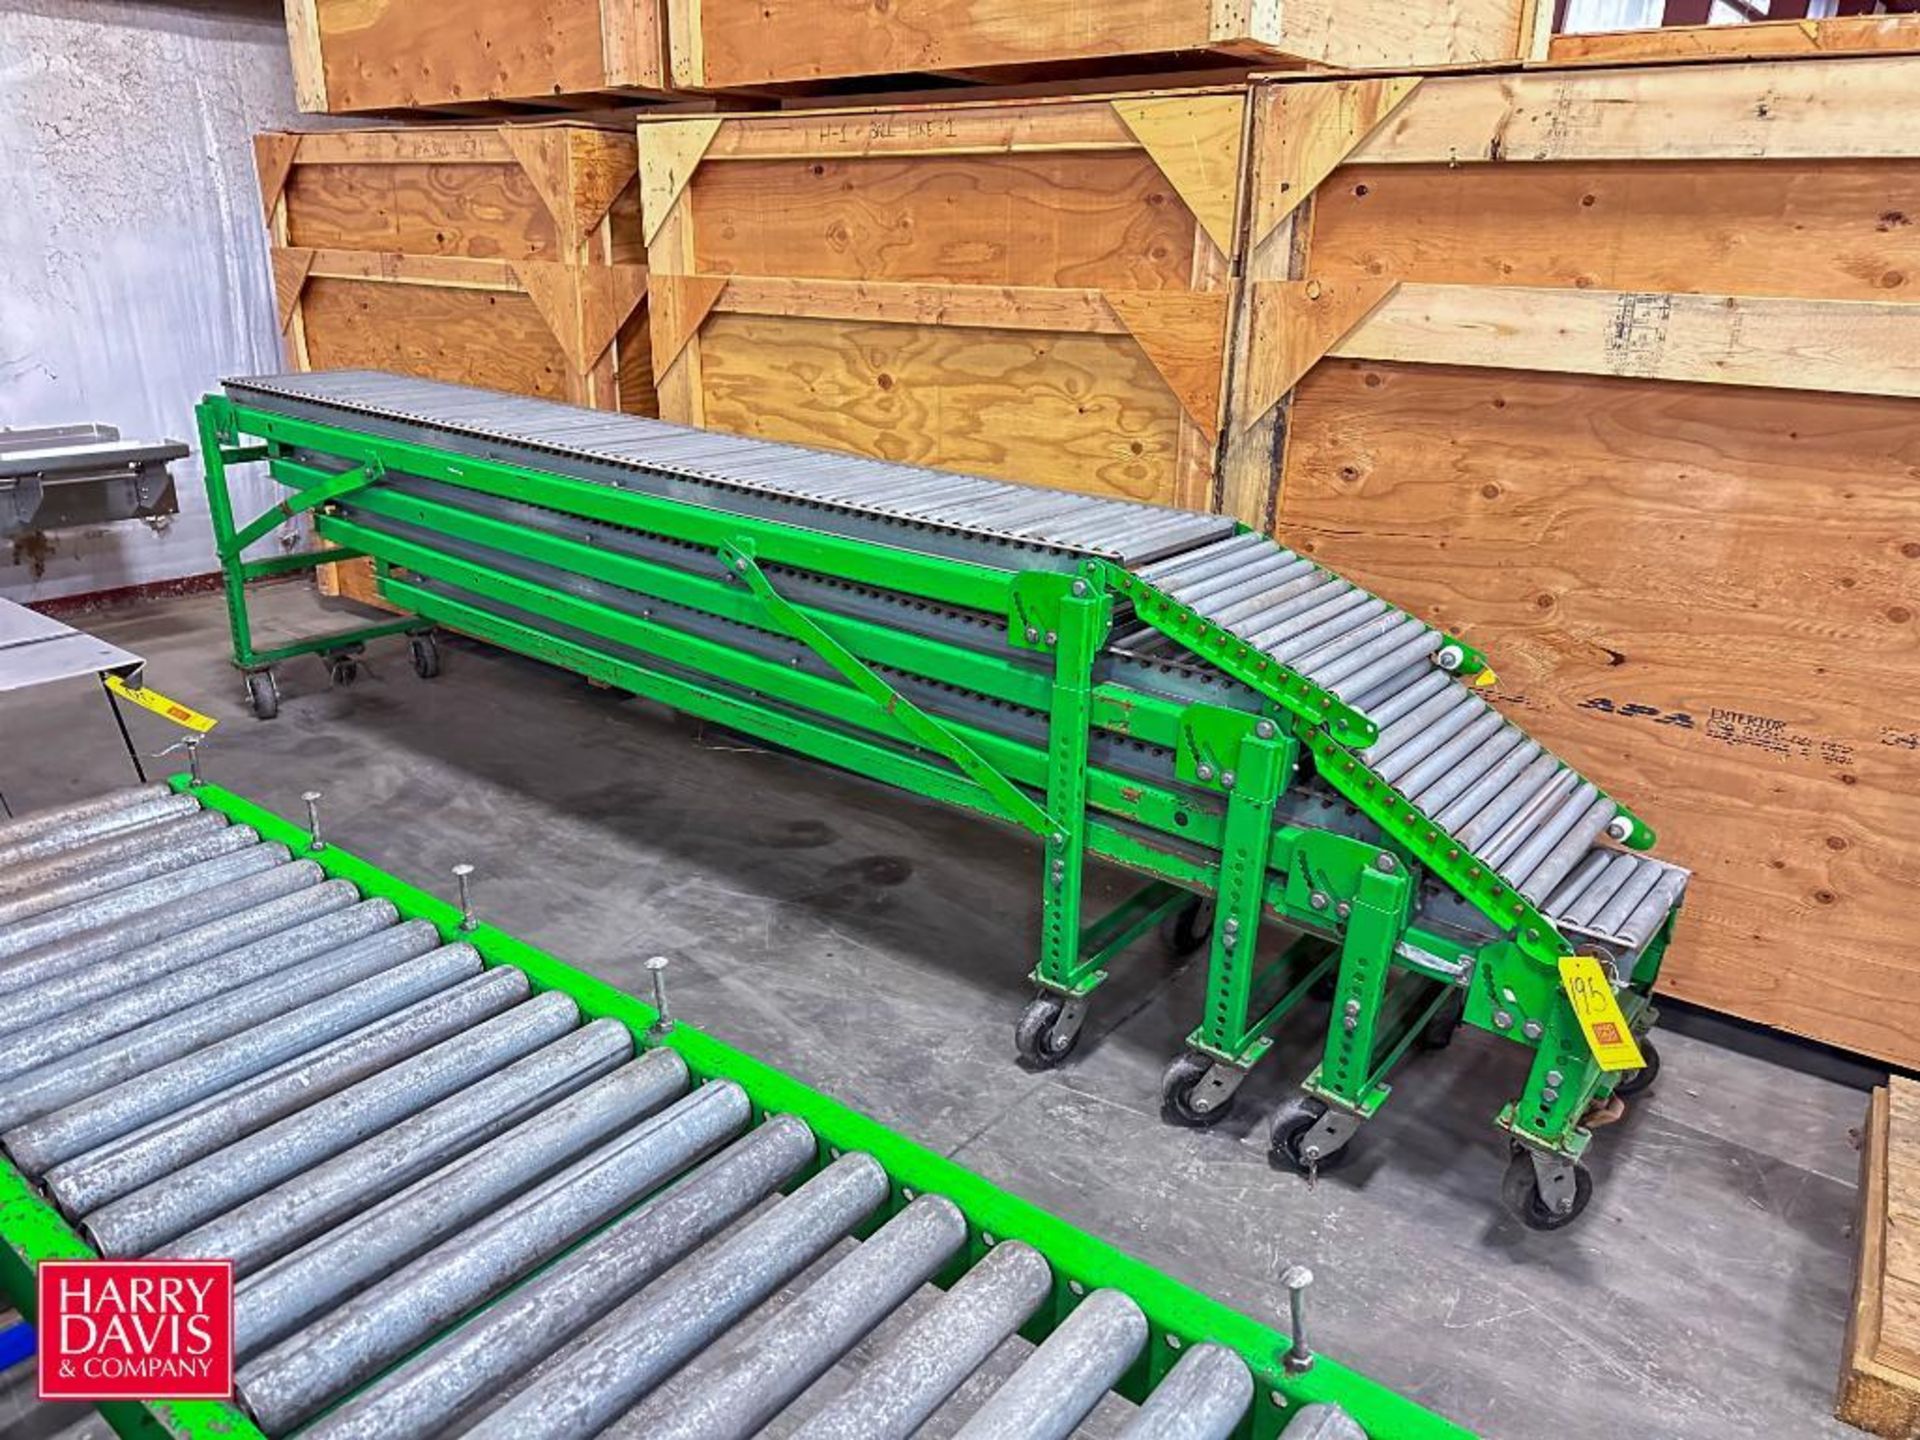 Expandable Roller Conveyor: 40' Length x 18.75" Width - Rigging Fee: $100